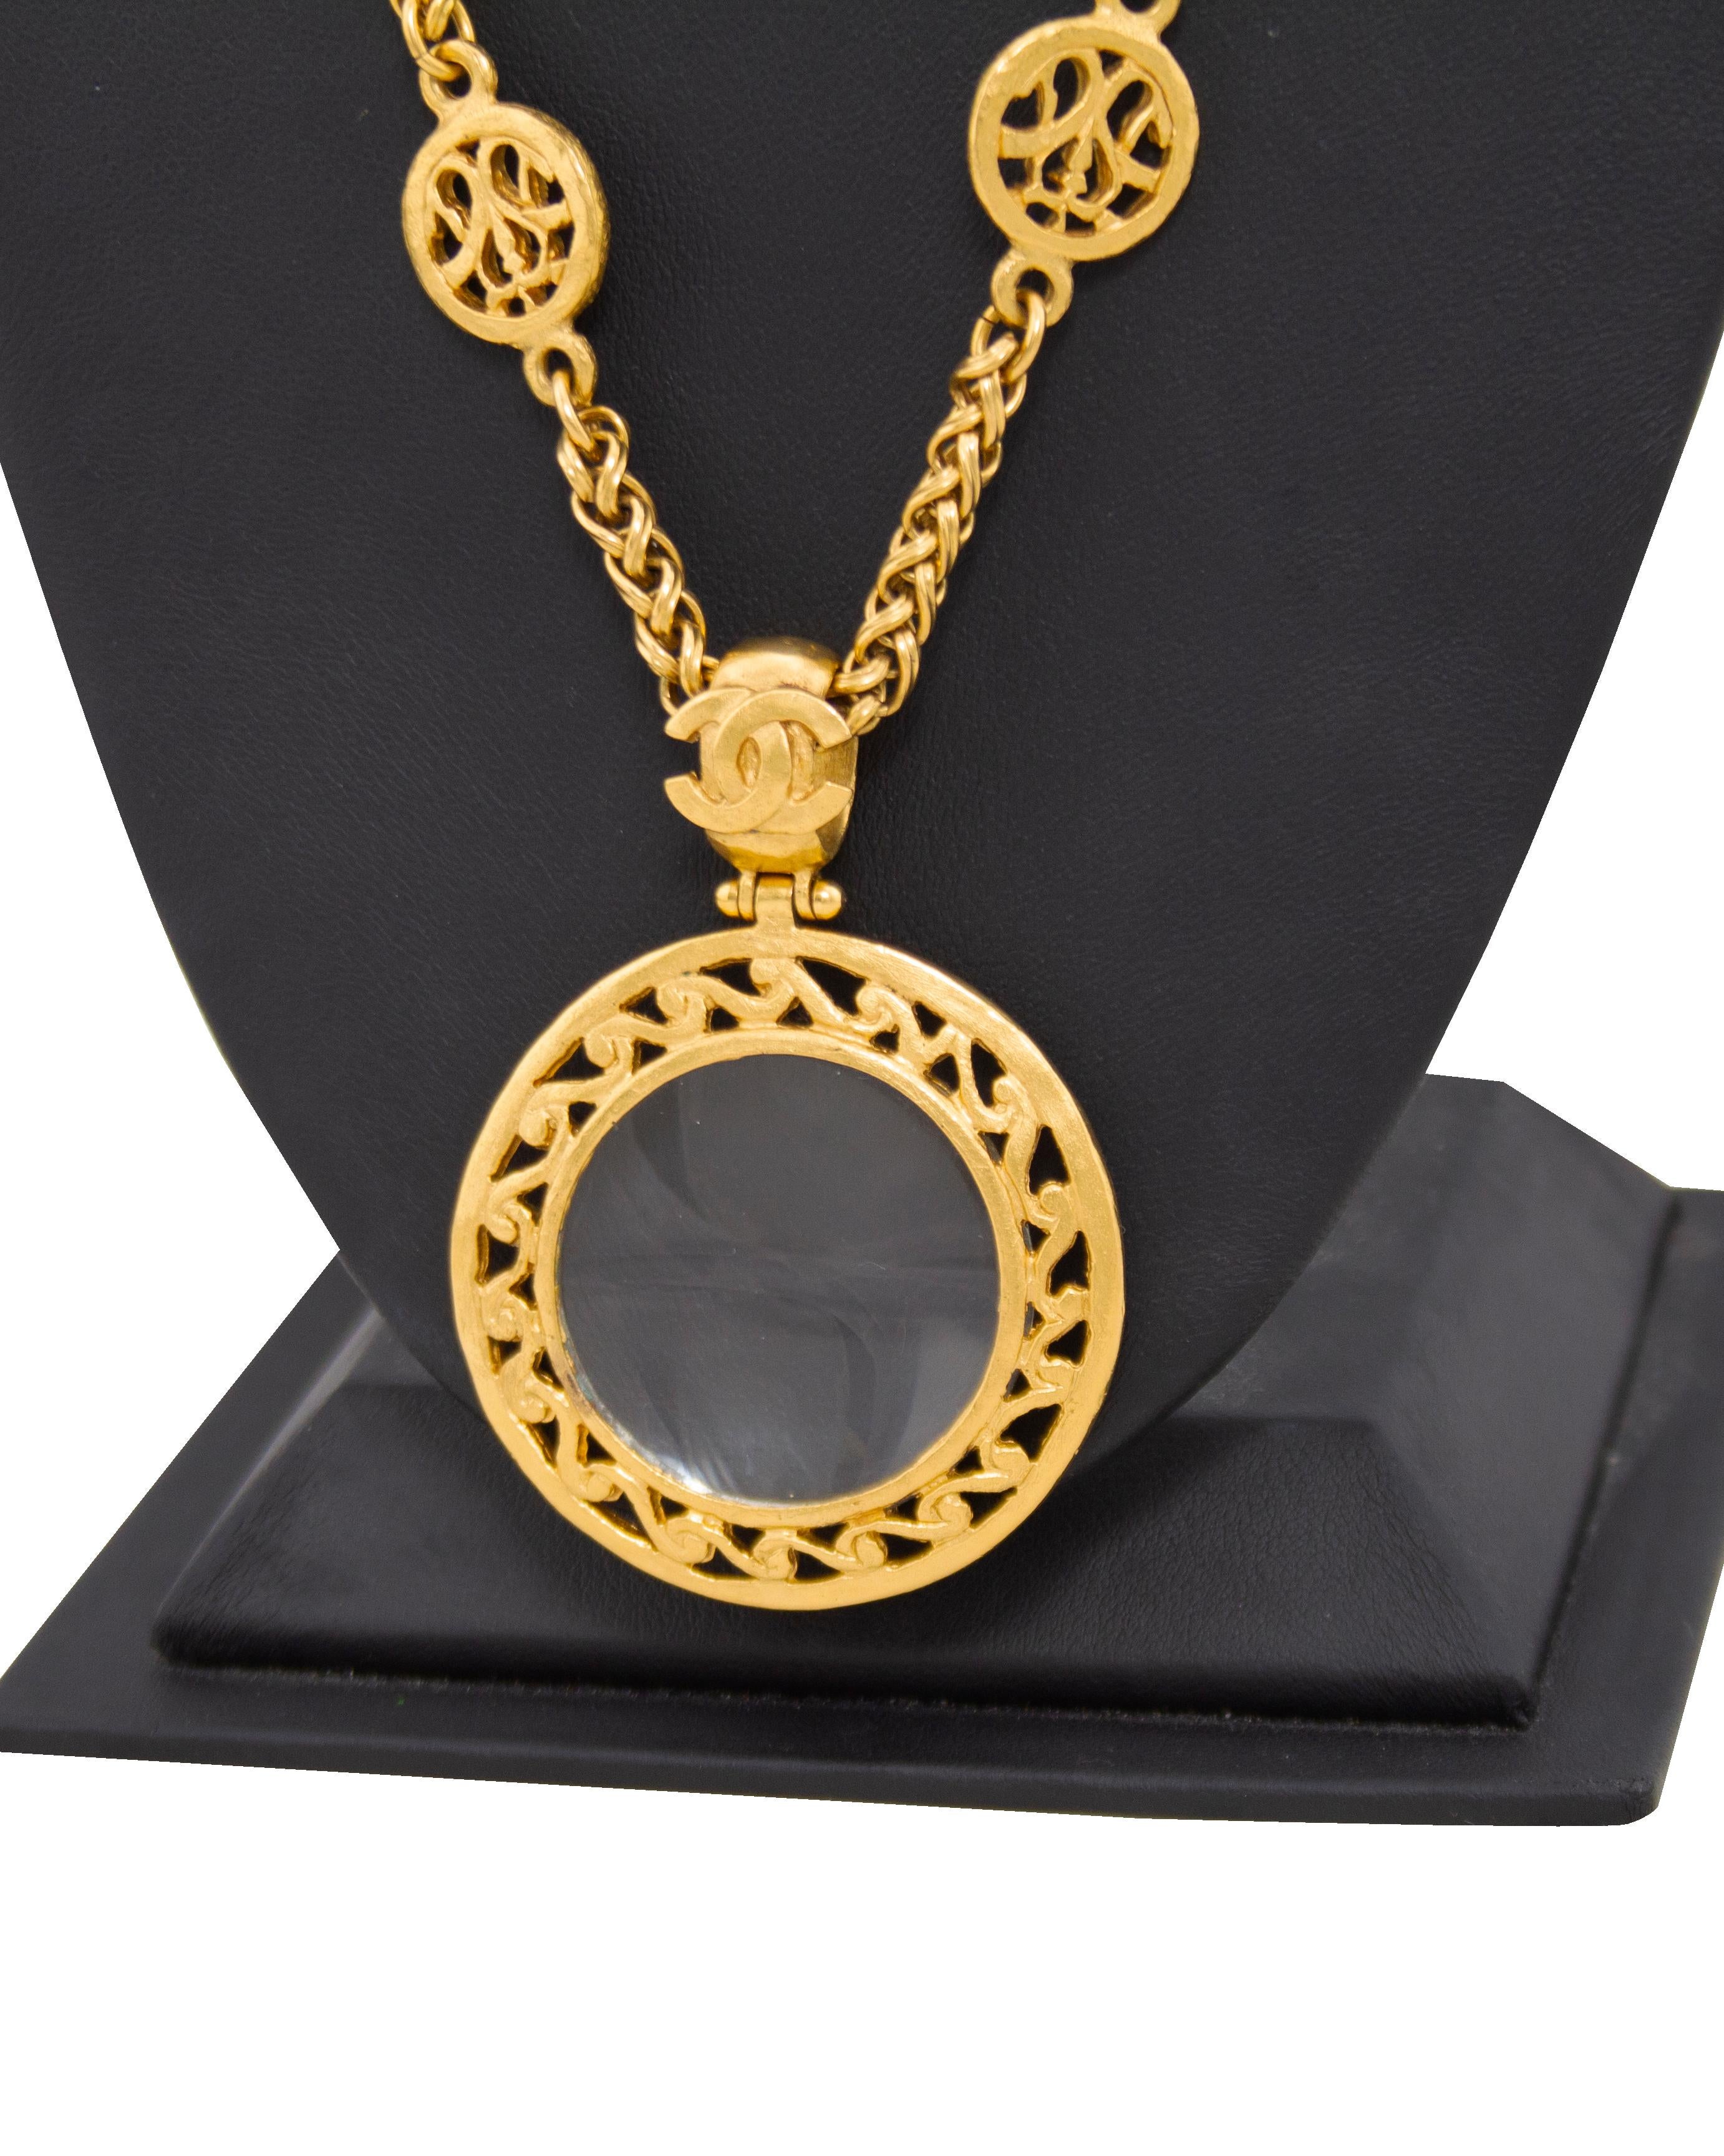 Chanel gold tone loupe from the autumn 1995 collection. The long chain link necklace features intricately detailed 0.75